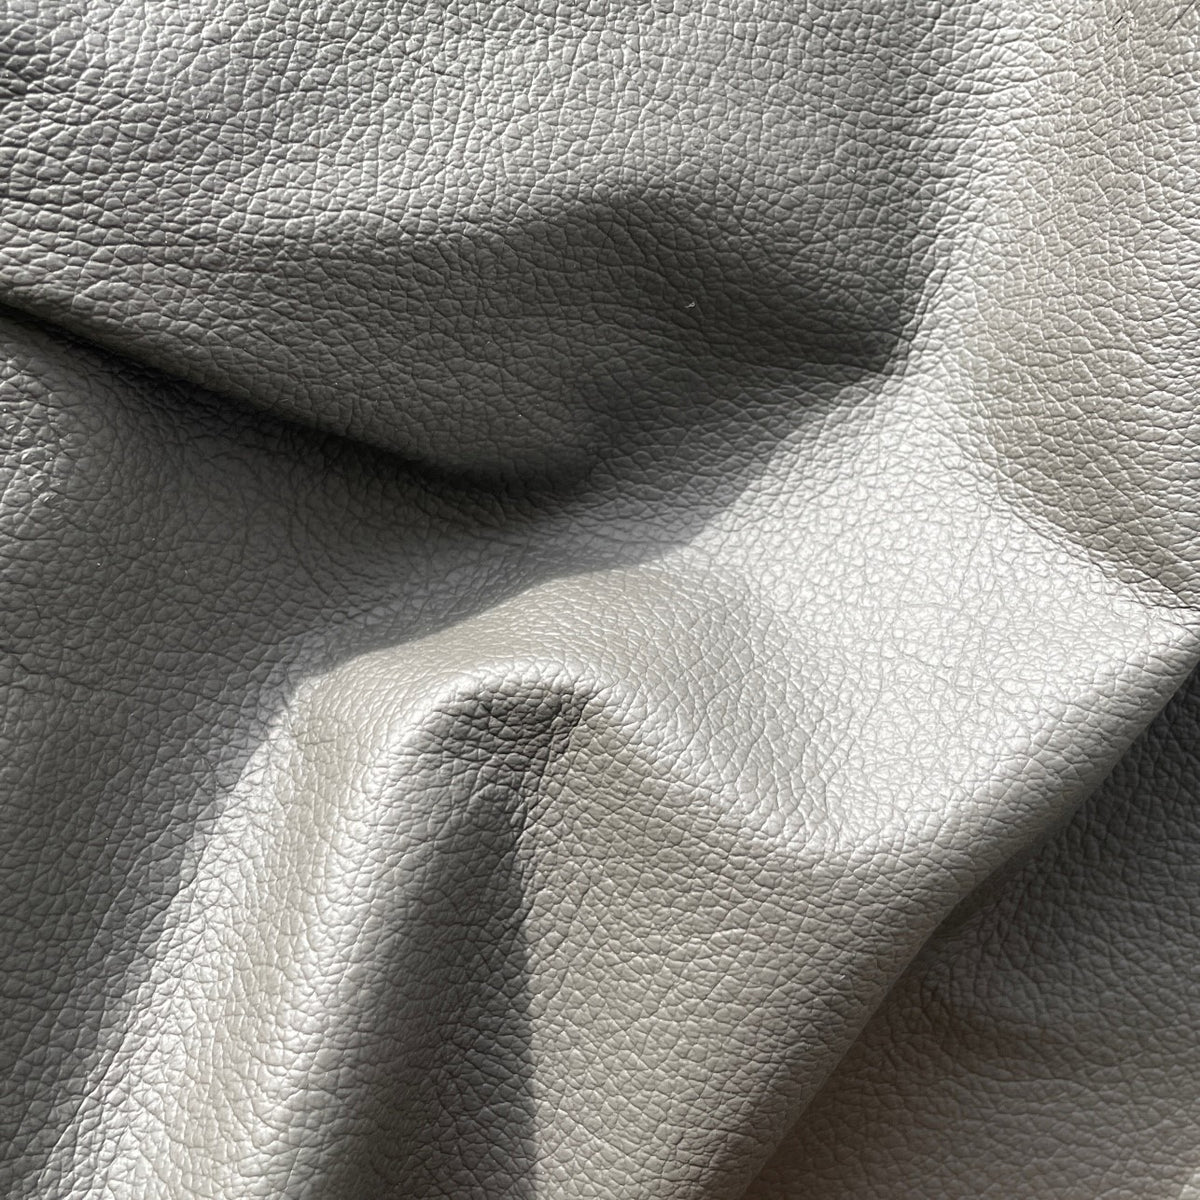 Upholstery Cow Hide #33 | Grey | 0.9 mm | 5.02, 5.71 sq.m | $368 and $424 ea.